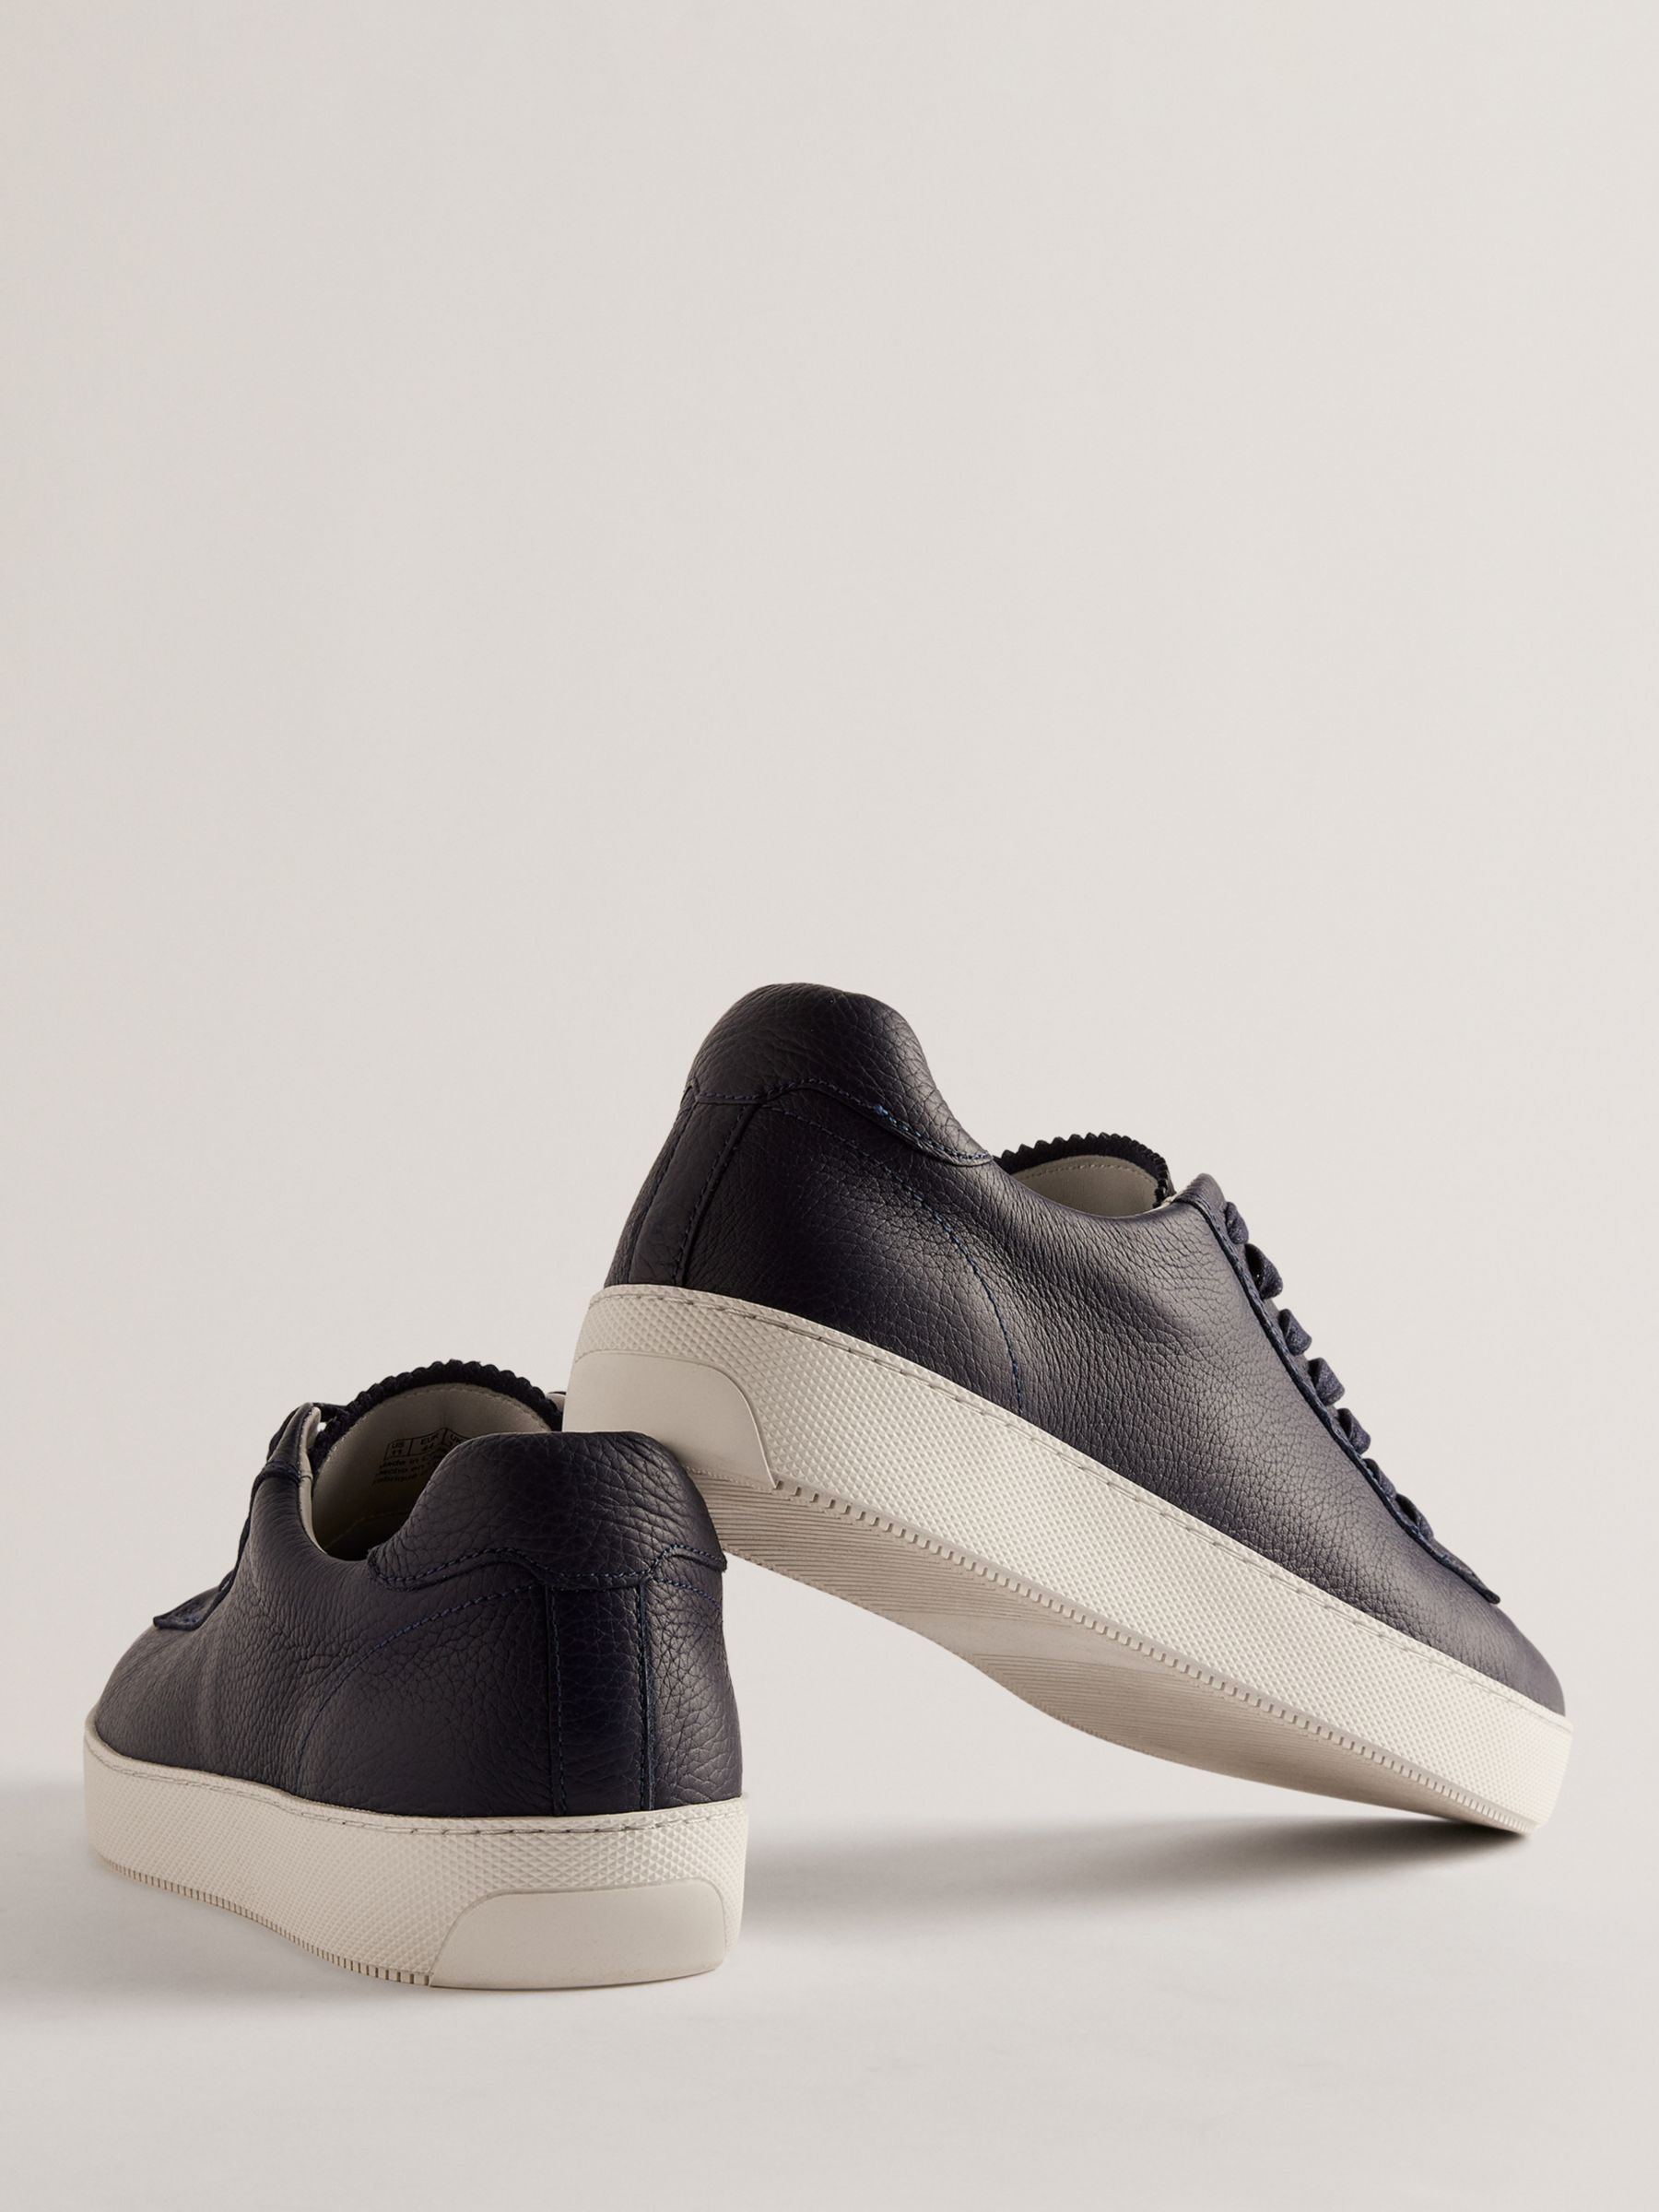 Ted Baker Leather Pebble Trainers, Navy, EU41